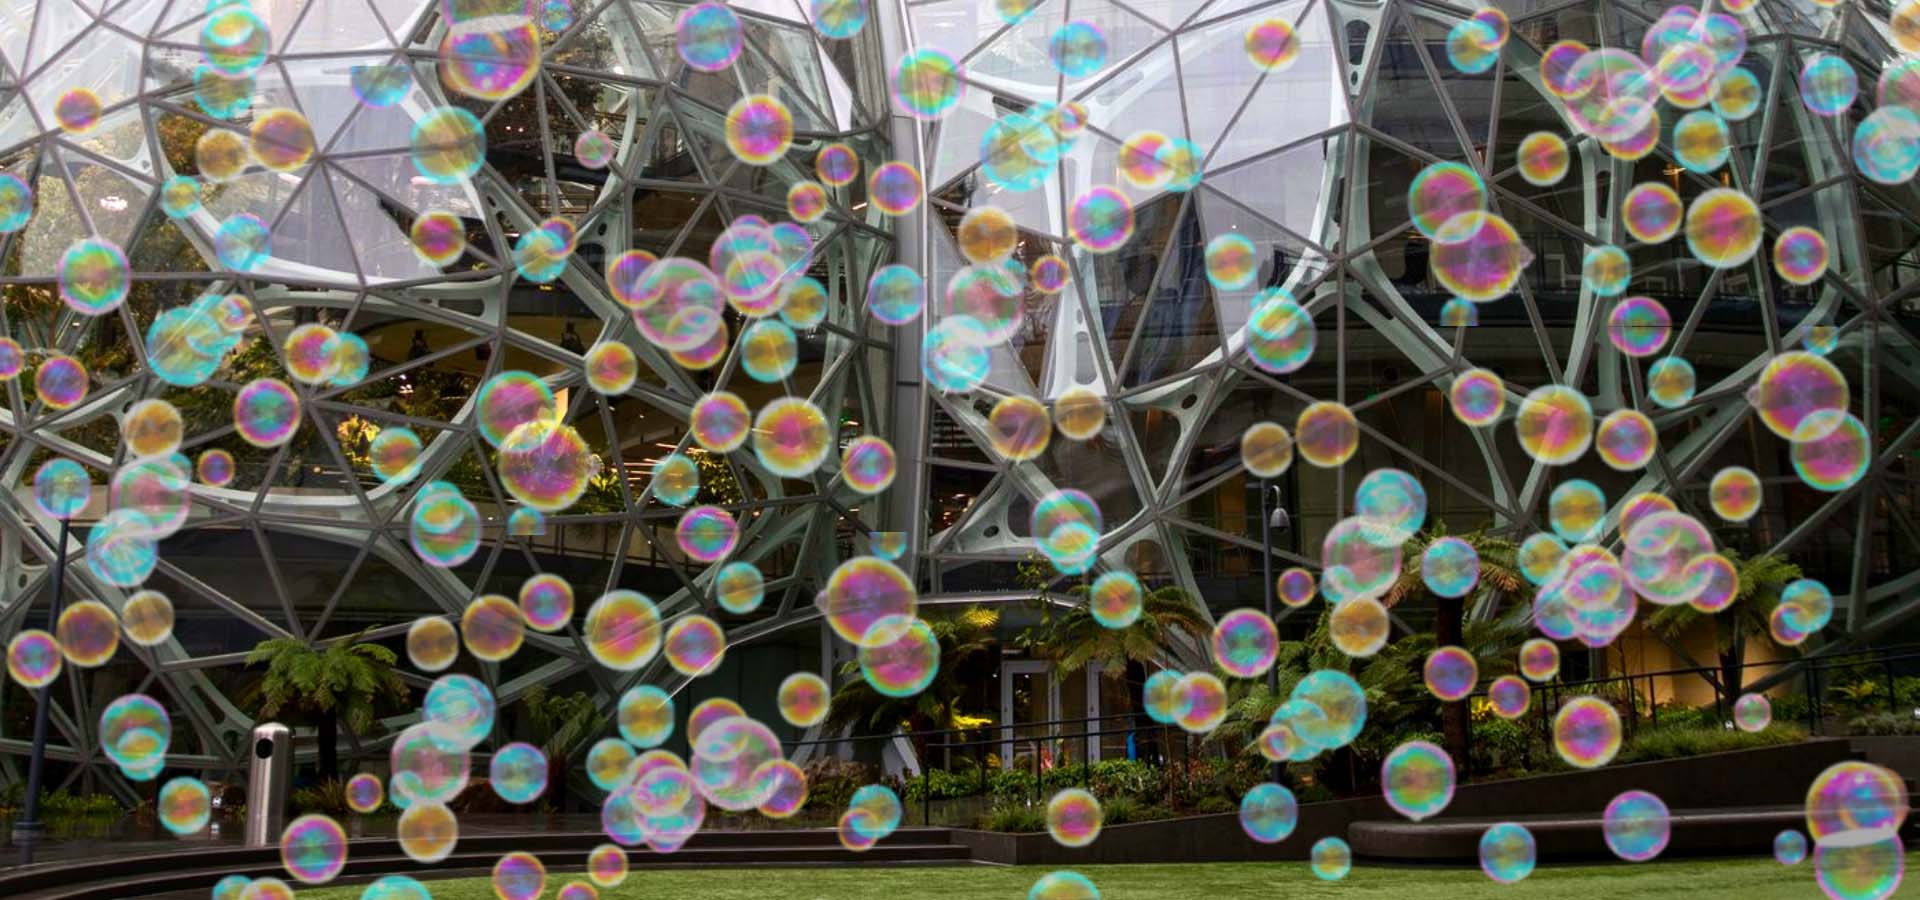 Bubbles floating in front the Amazon Spheres.